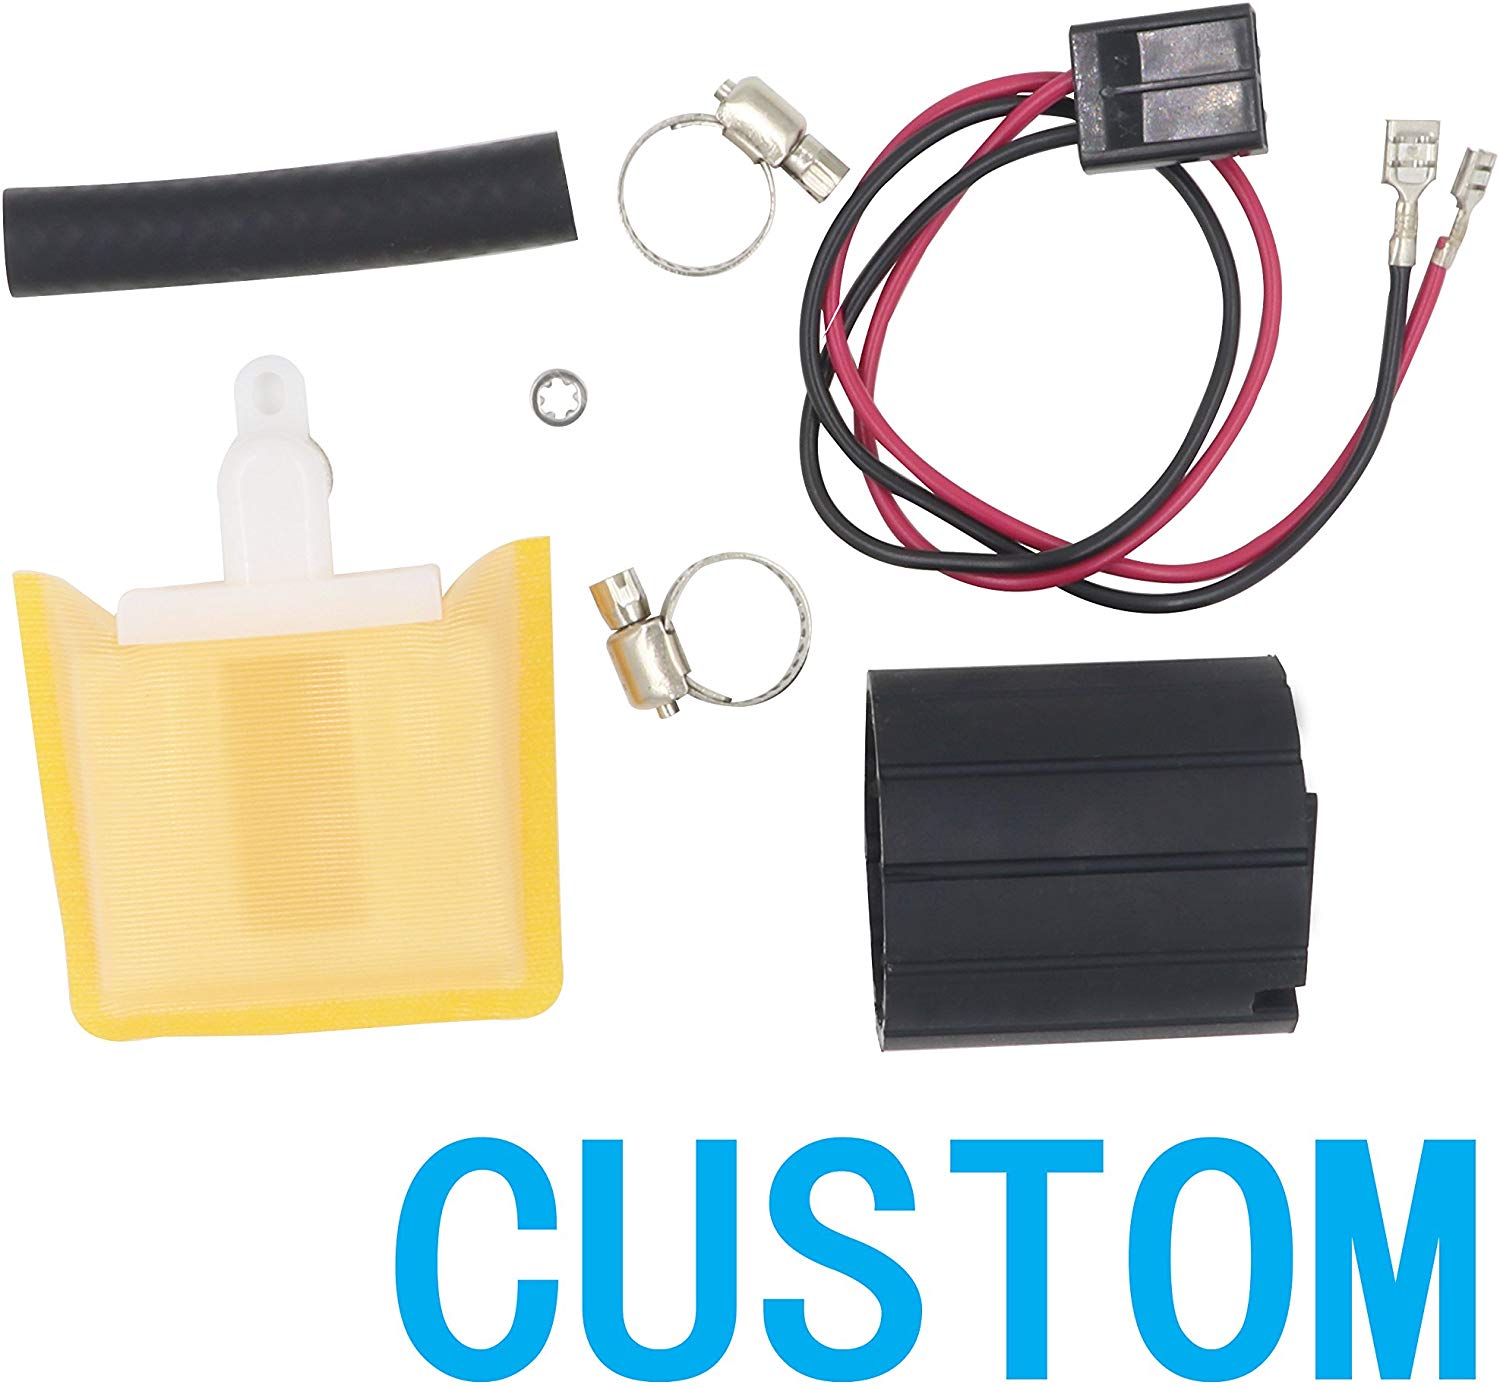 AUTOTOP Electric Fuel Pump Strainer & Connect Wire & Clamps & Gasket & Cover